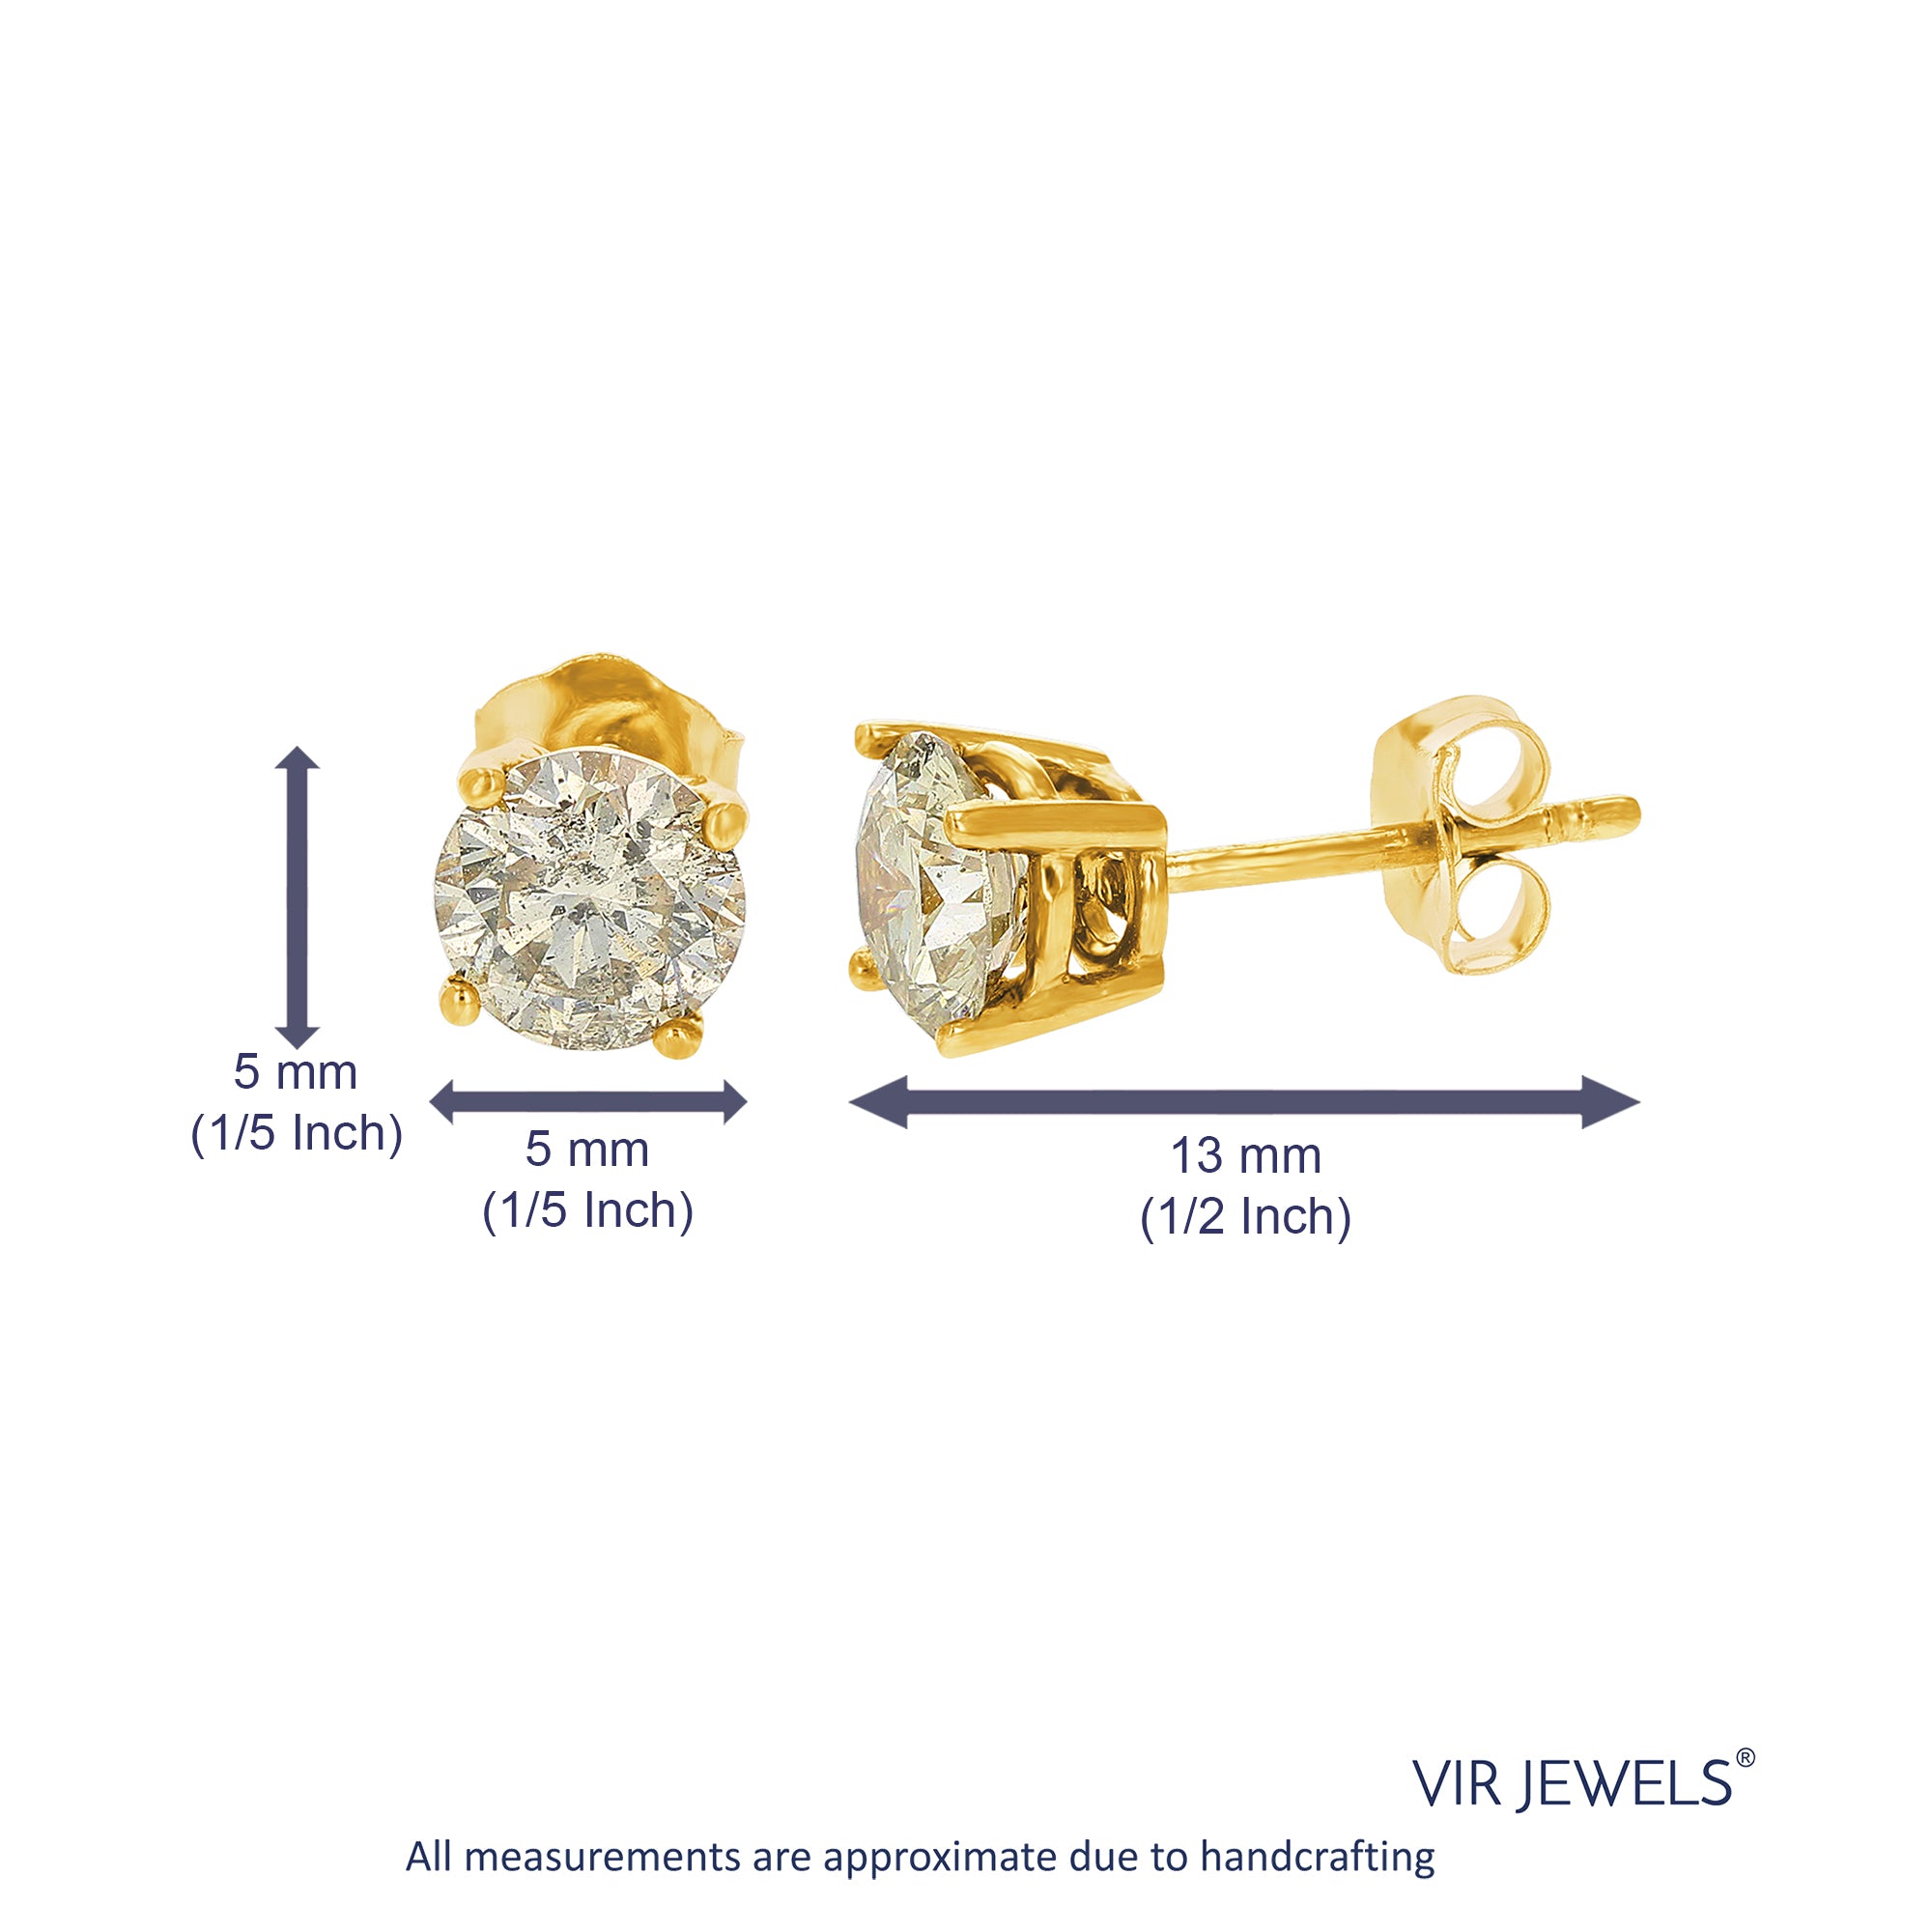 3/4 cttw Champagne Diamond Stud Earrings 14K White or Yellow Gold Round Basket